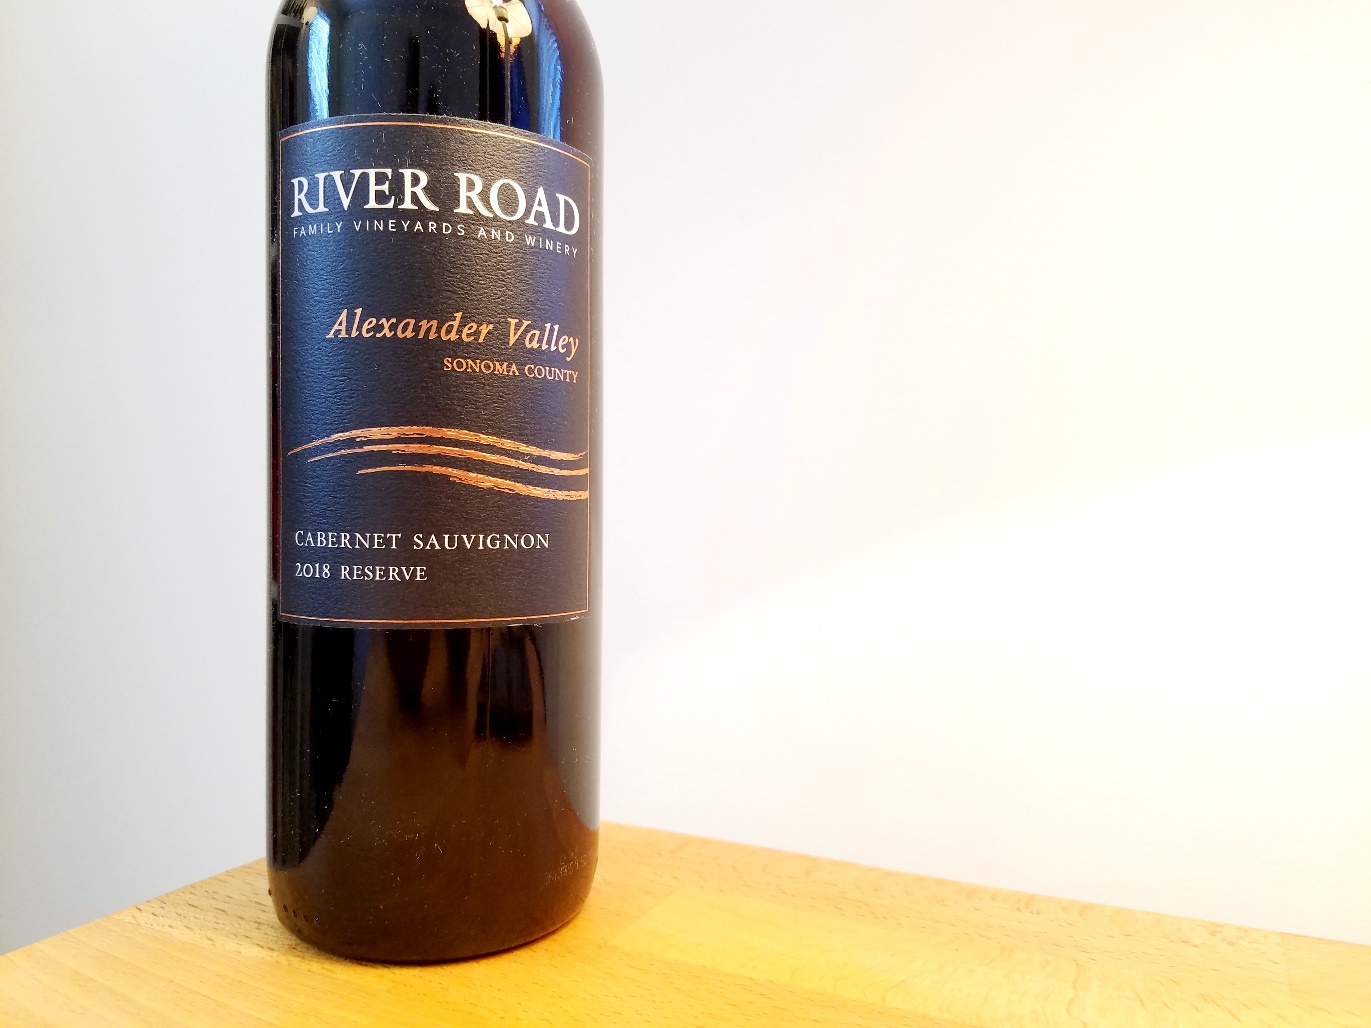 River Road Family Vineyards and Winery, Reserve Cabernet Sauvignon 2018, Alexander Valley, Sonoma County, California, Wine Casual